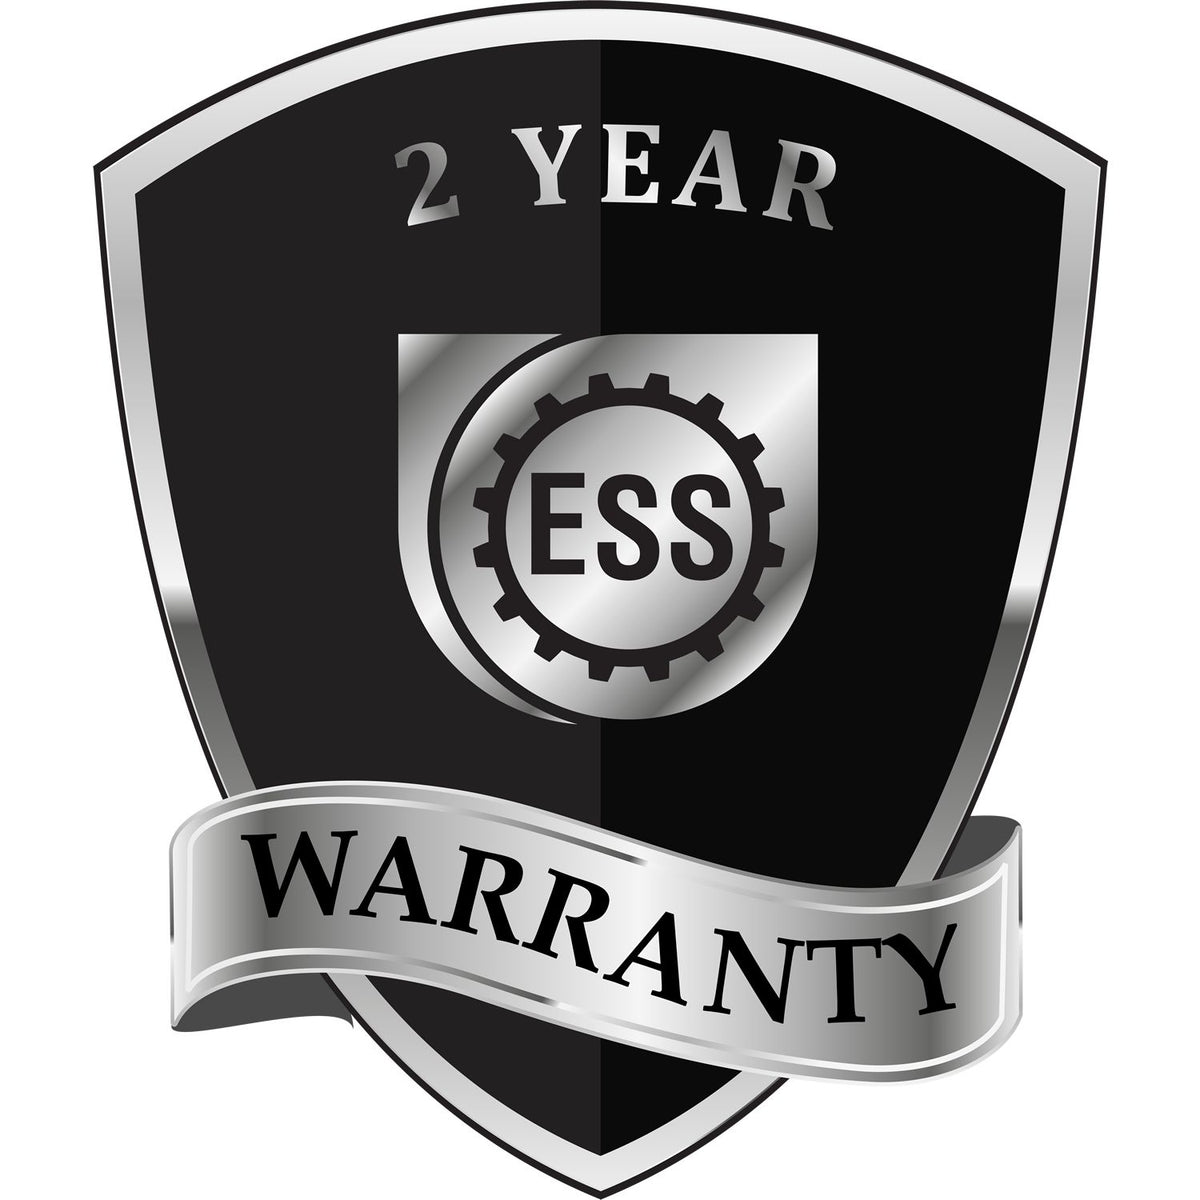 A black and silver badge or emblem showing warranty information for the Gift Rhode Island Architect Seal